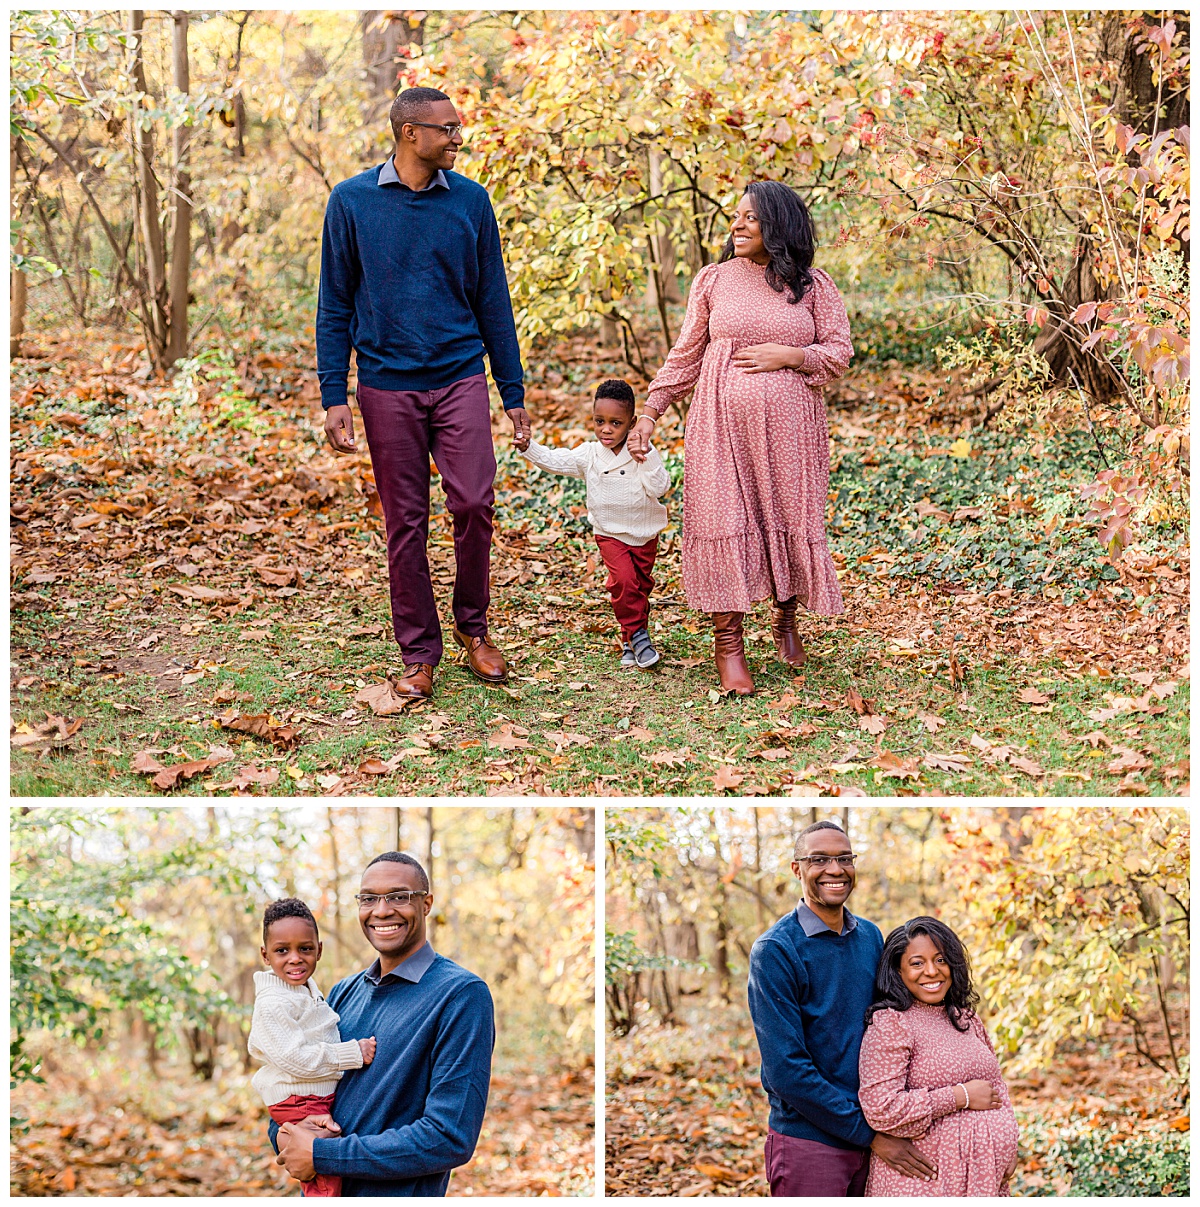 Fall mini session for a family of three with a little boy at Awbury Arboretum taken by Ann Blake Photography, a Philadelphia family photographer.